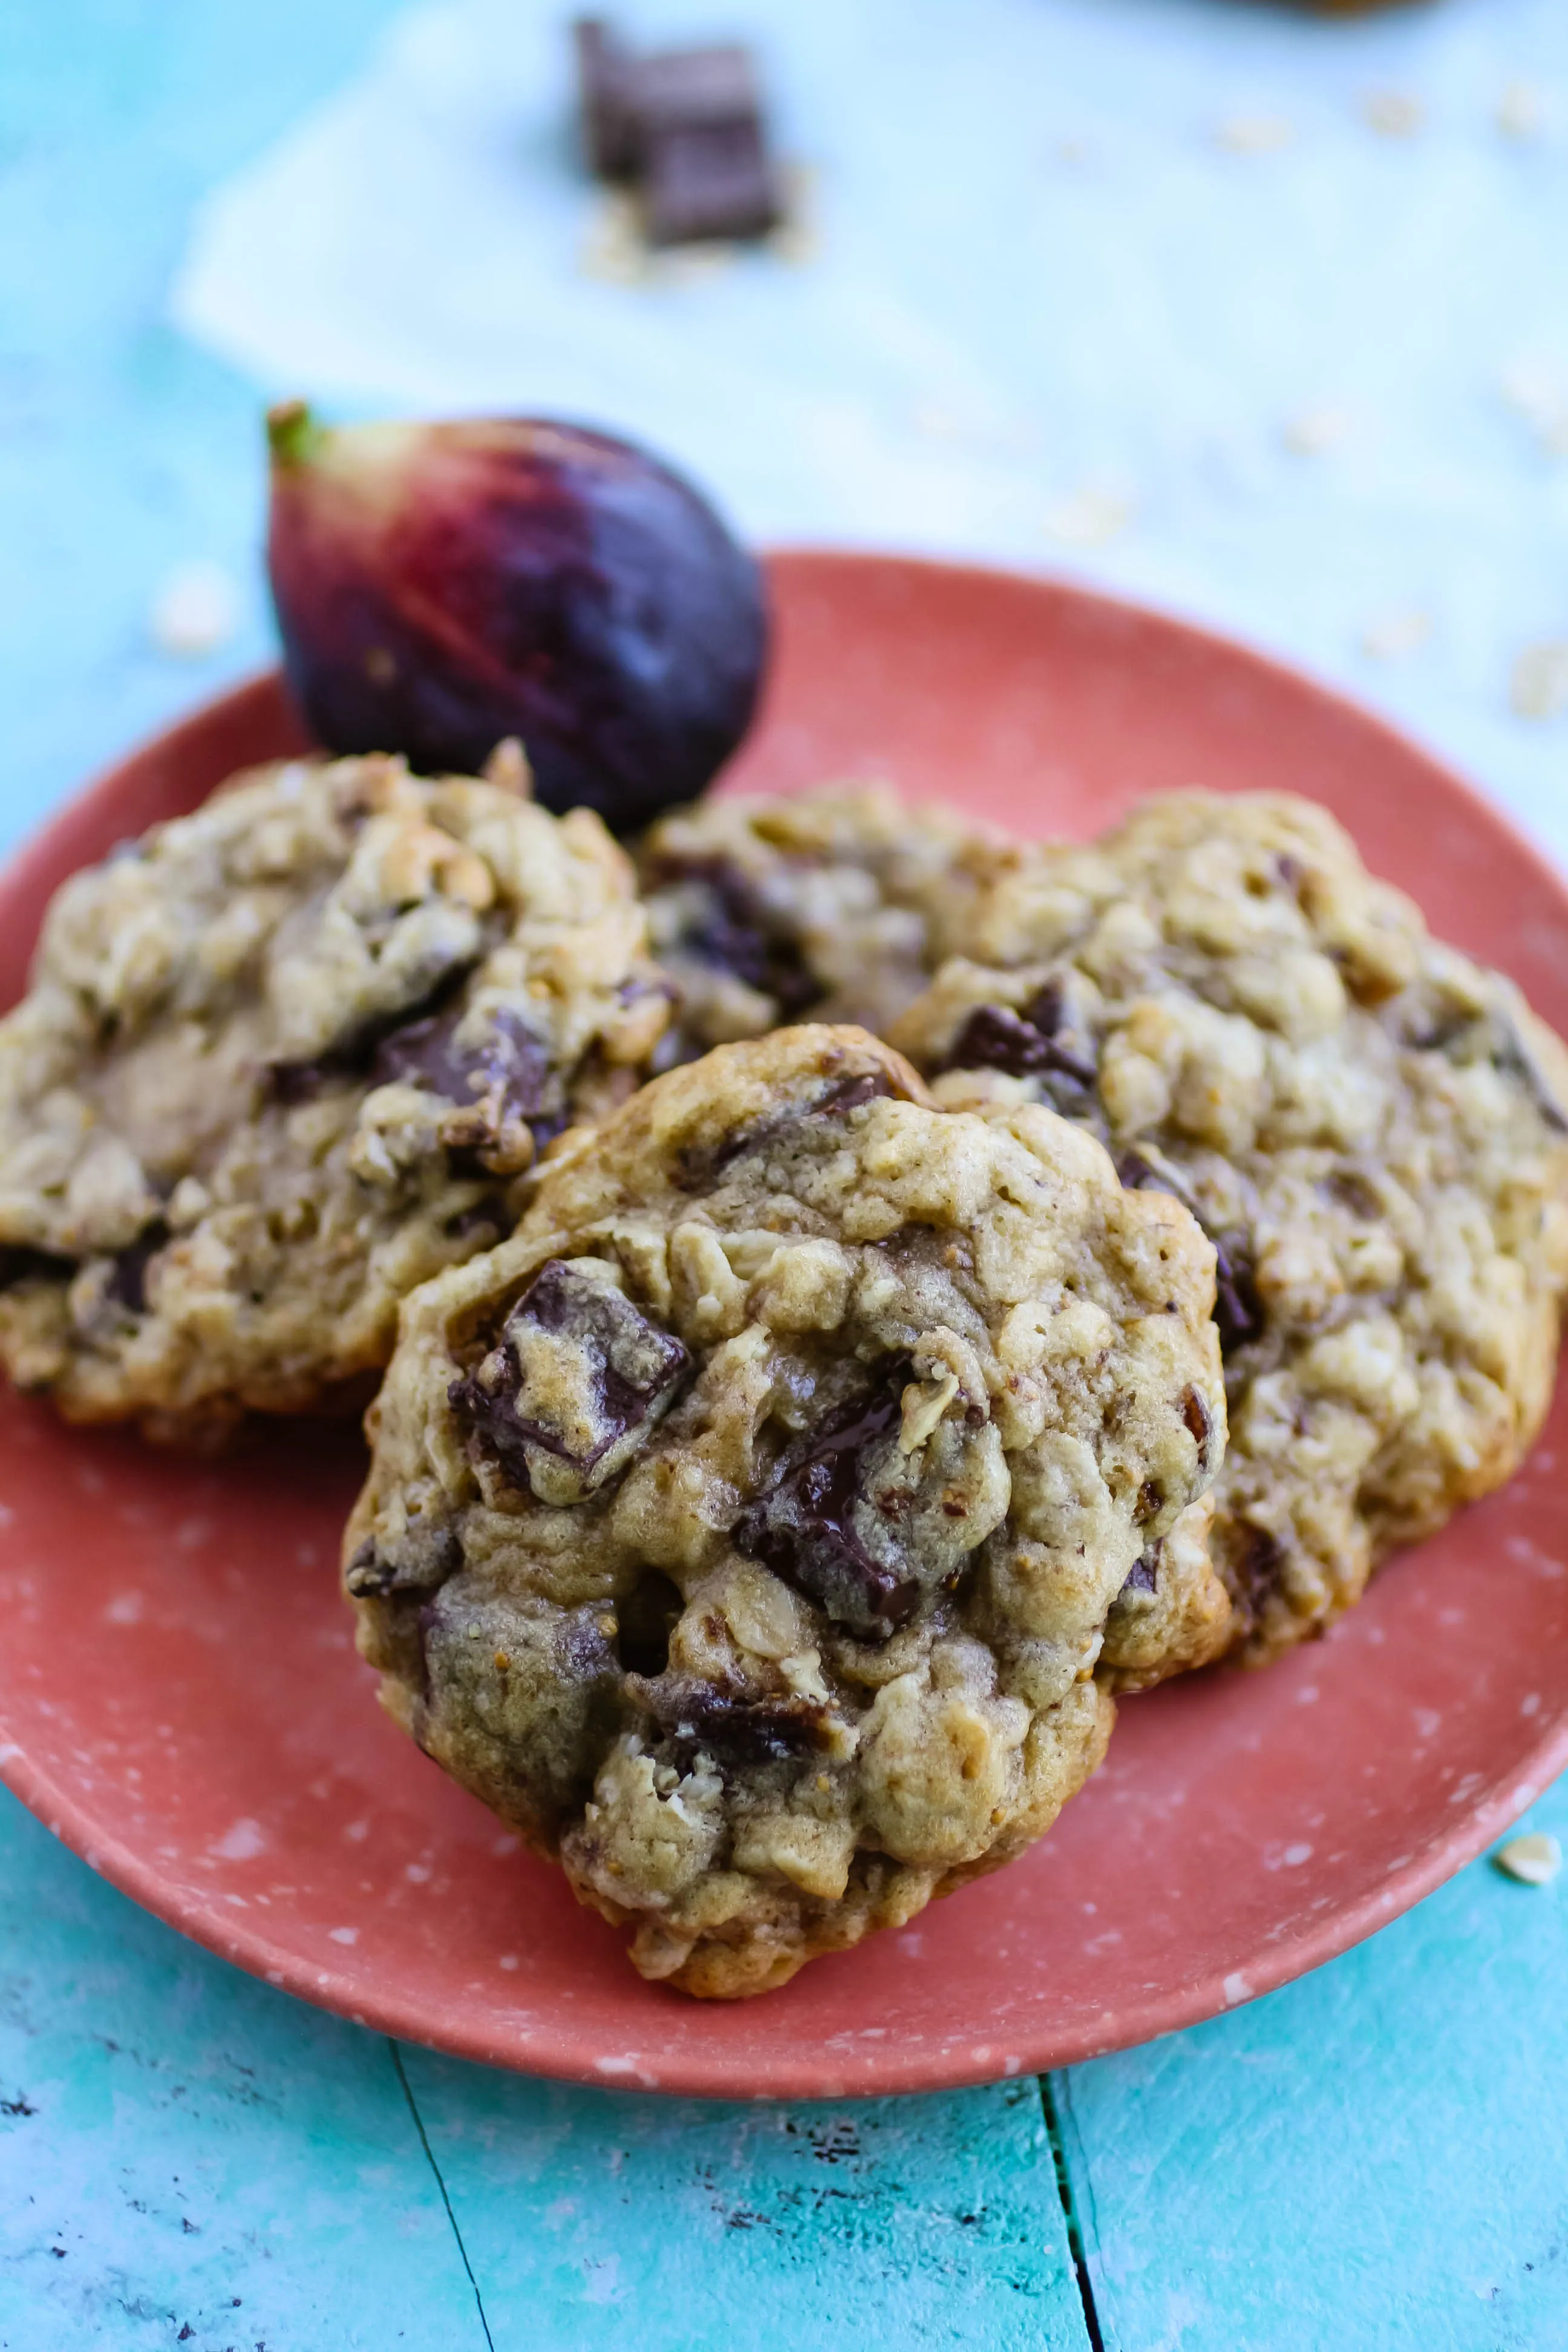 Oatmeal fig cookies with dark chocolate chunks are loaded with goodness. You'll fall in love with Oatmeal fig cookies with dark chocolate chunks!